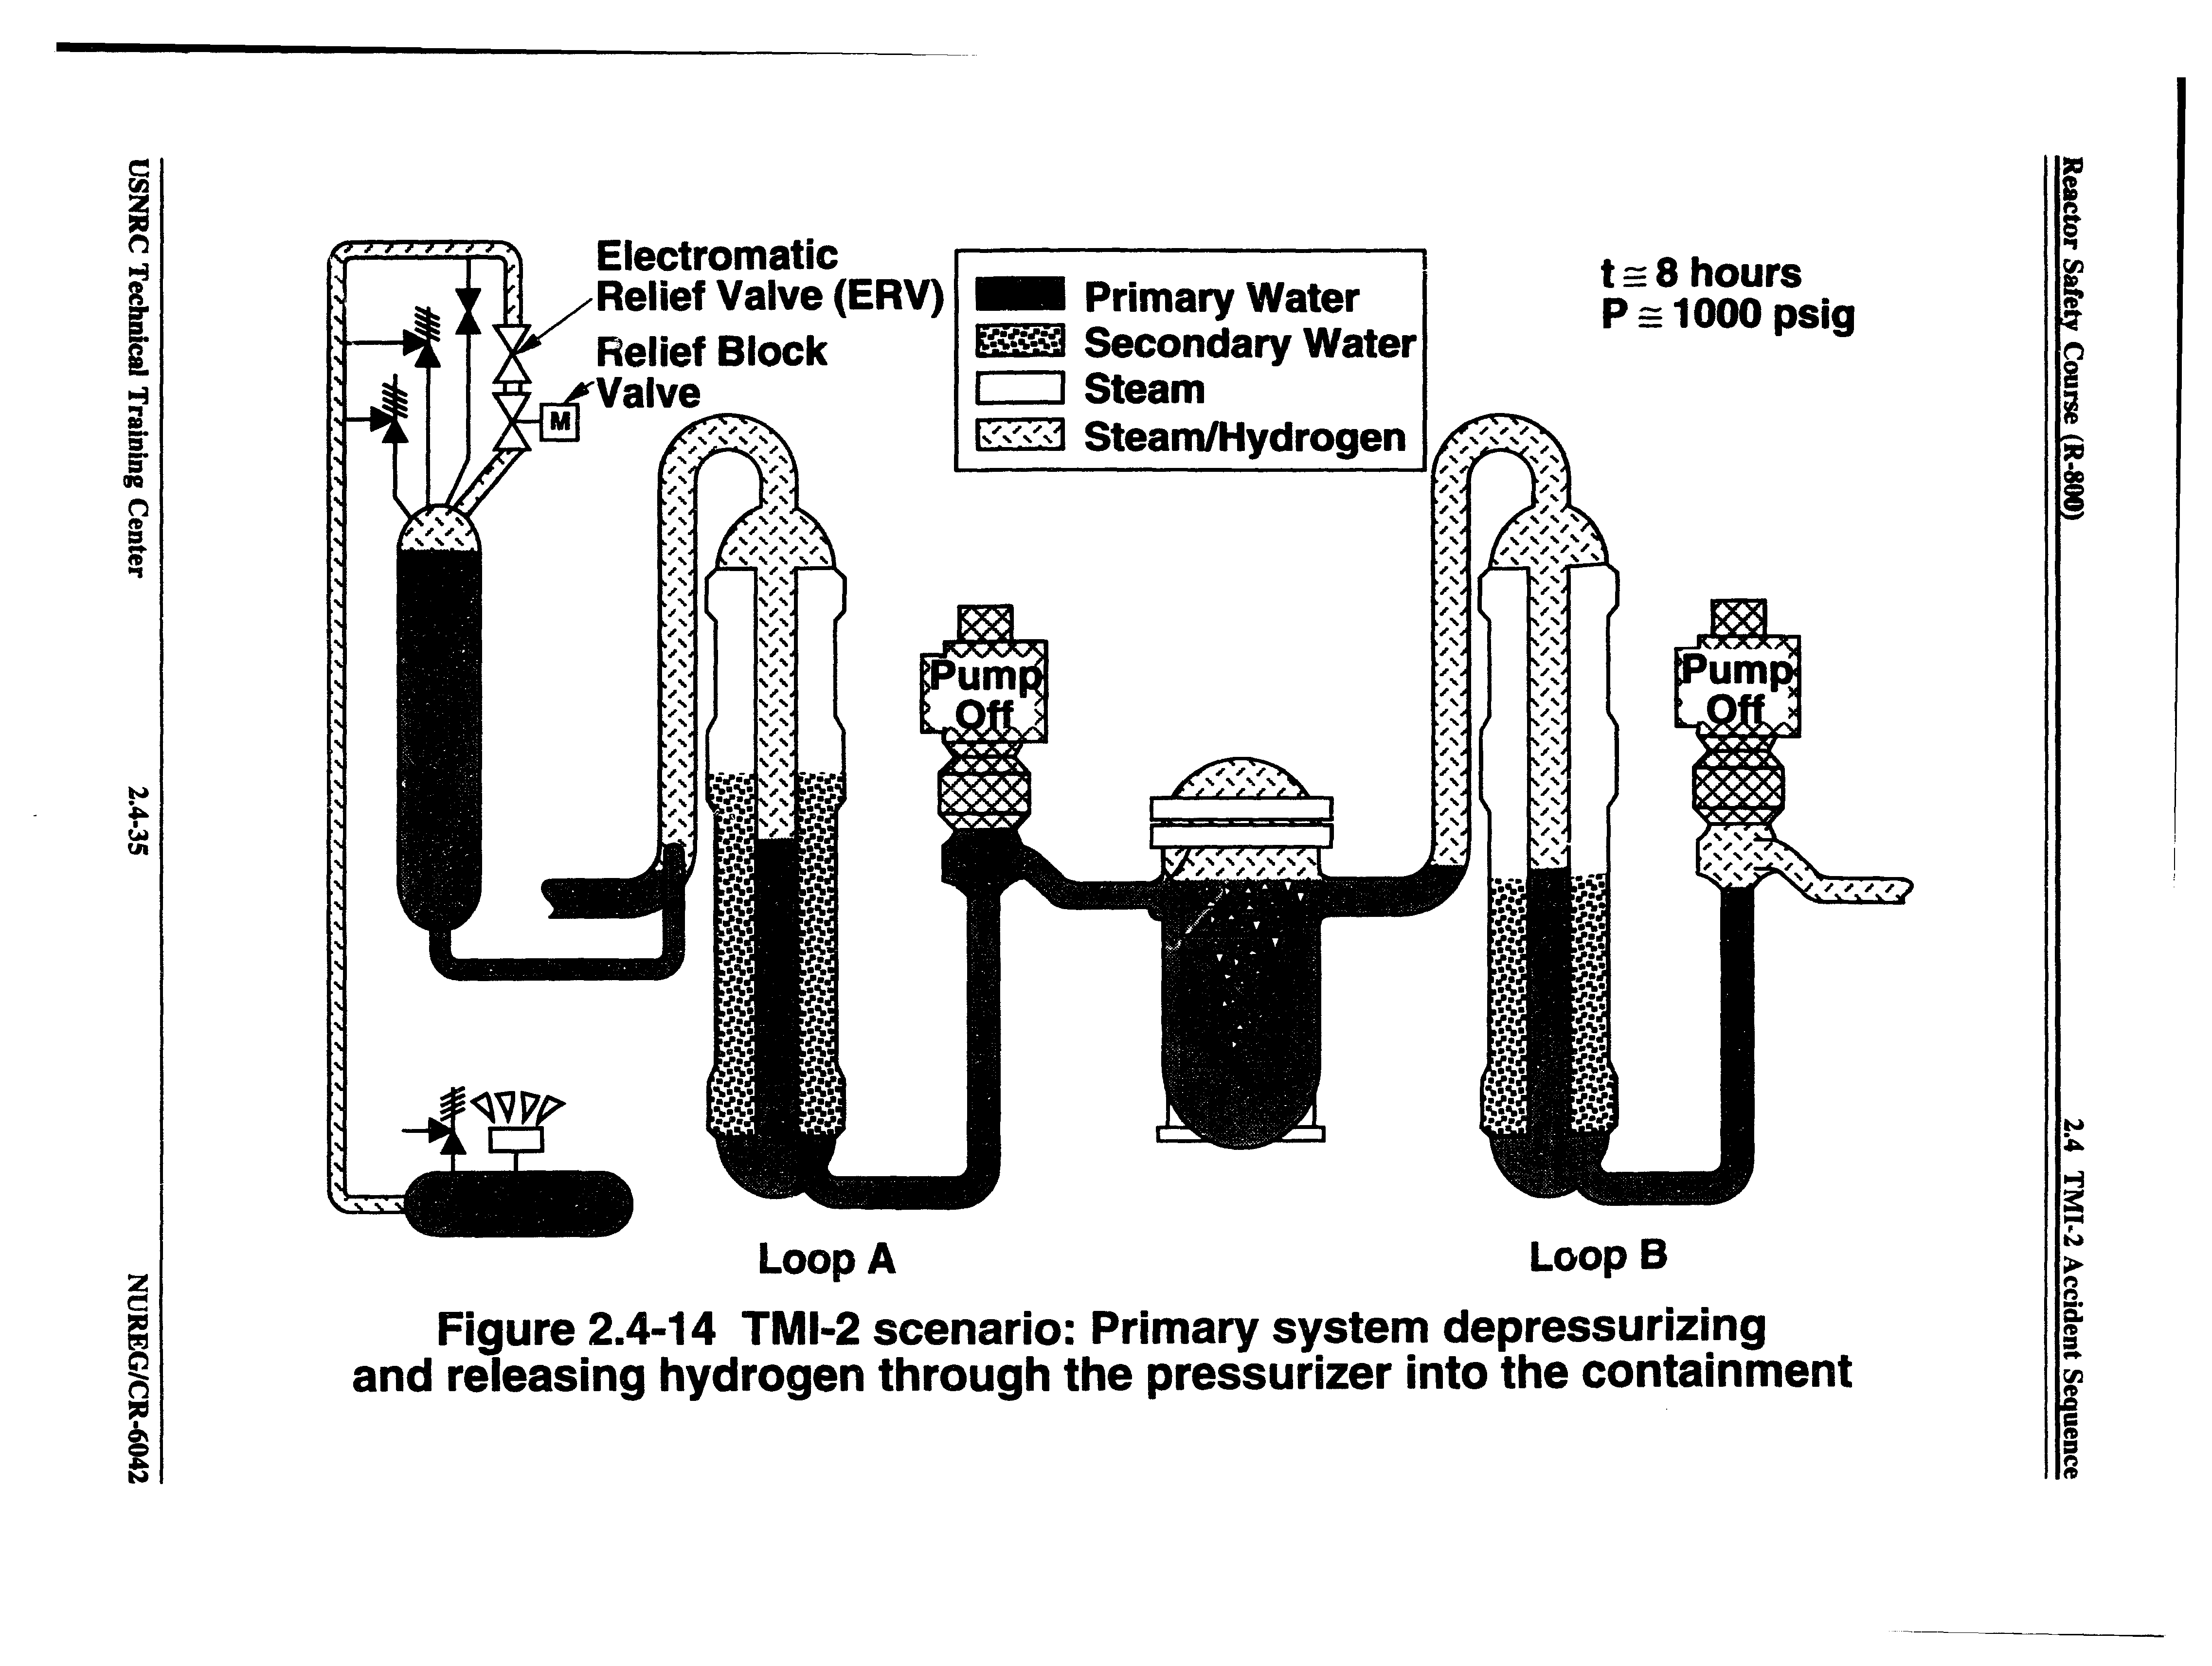 Figure 2.4-14 TMI-2 scenario Primary system depressurizing and reieasing hydrogen through the pressurizer into the containment...